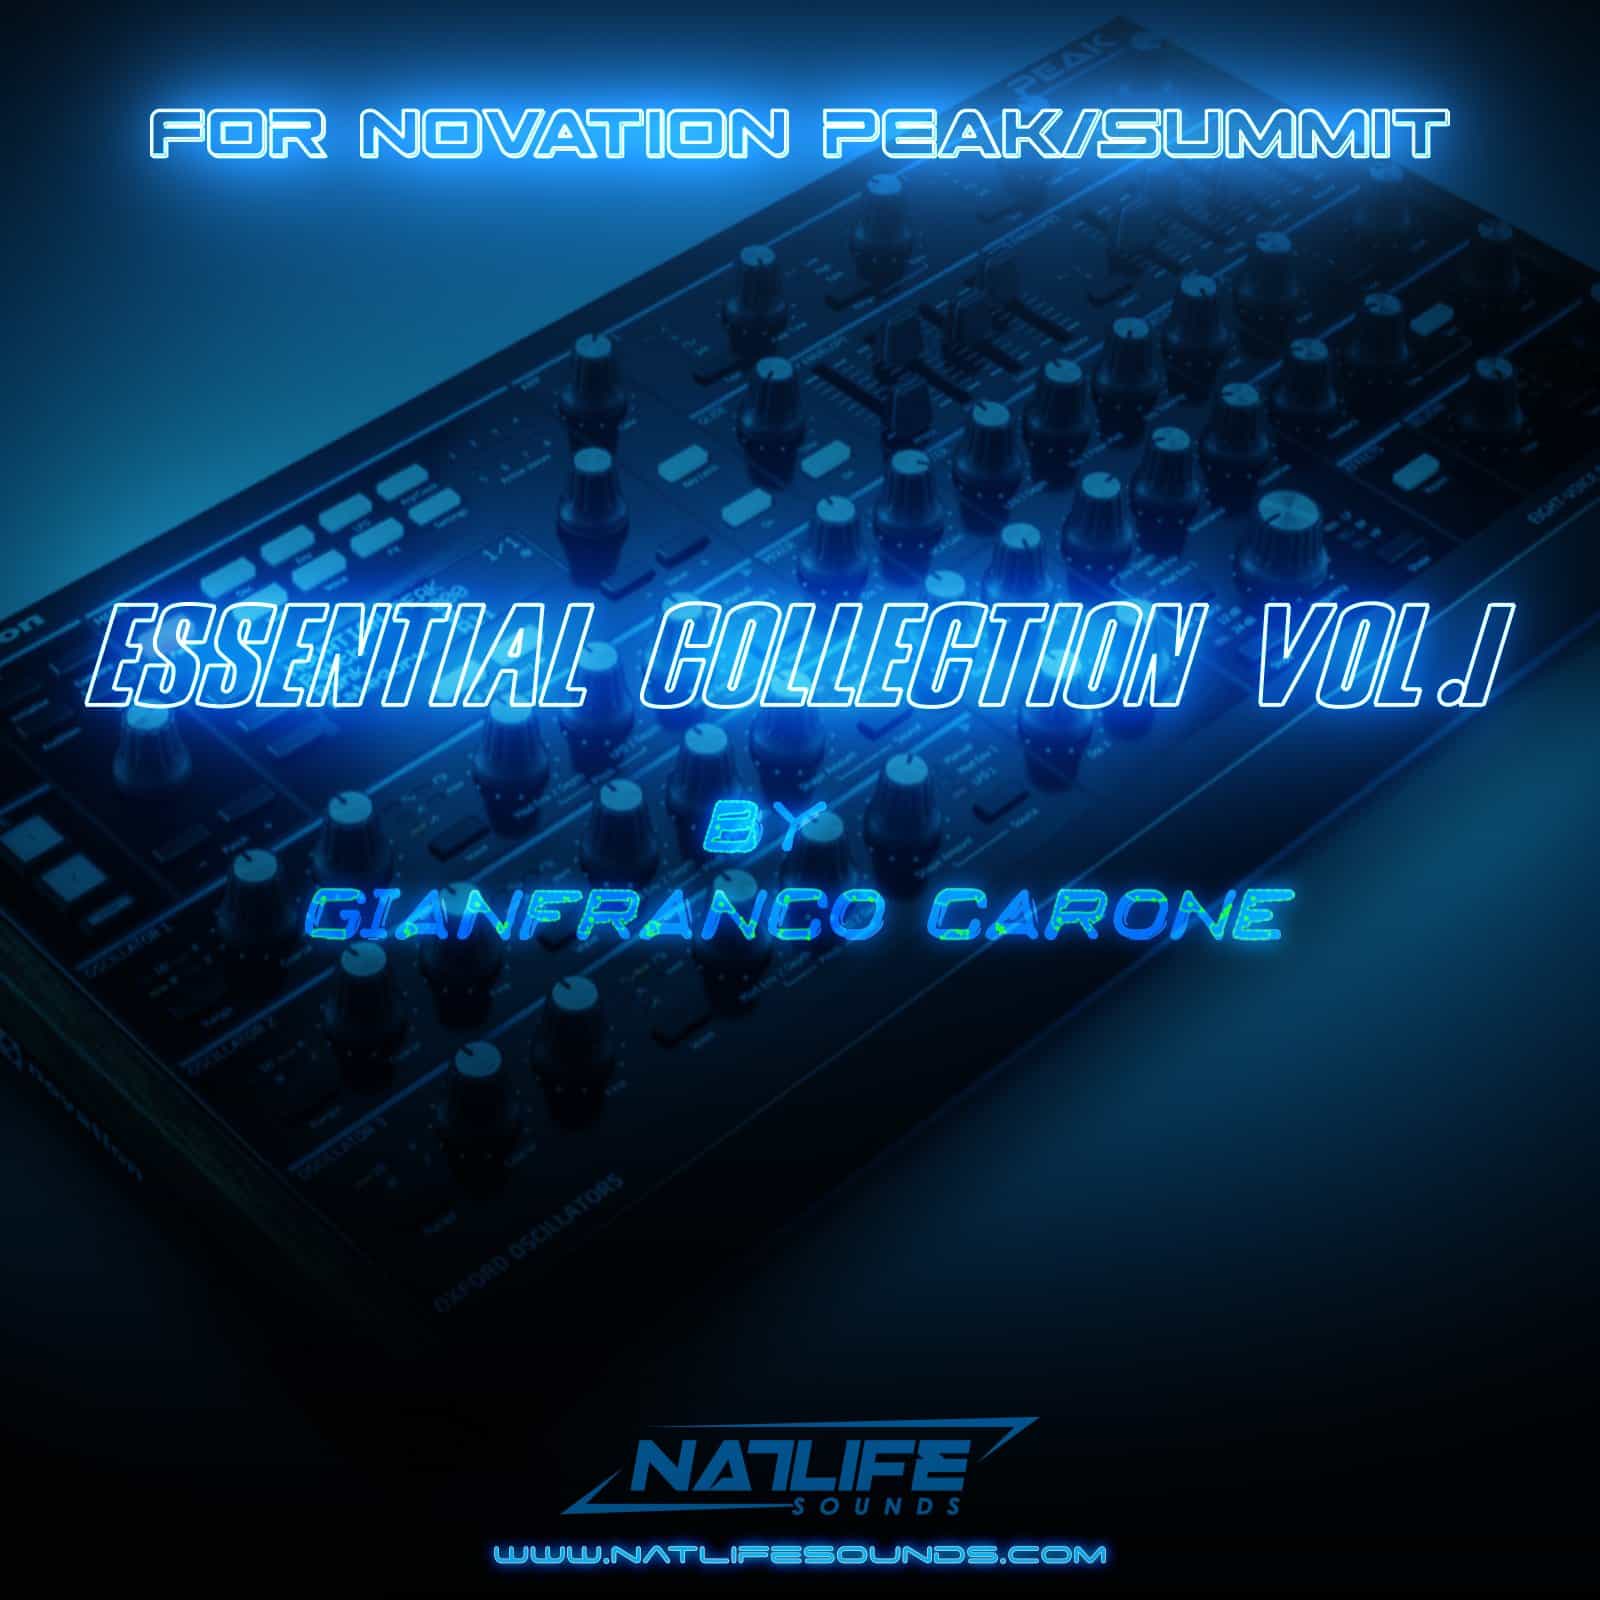 Essential Collection Vol.1 for Novation Summit/Peak by NatLife Sounds